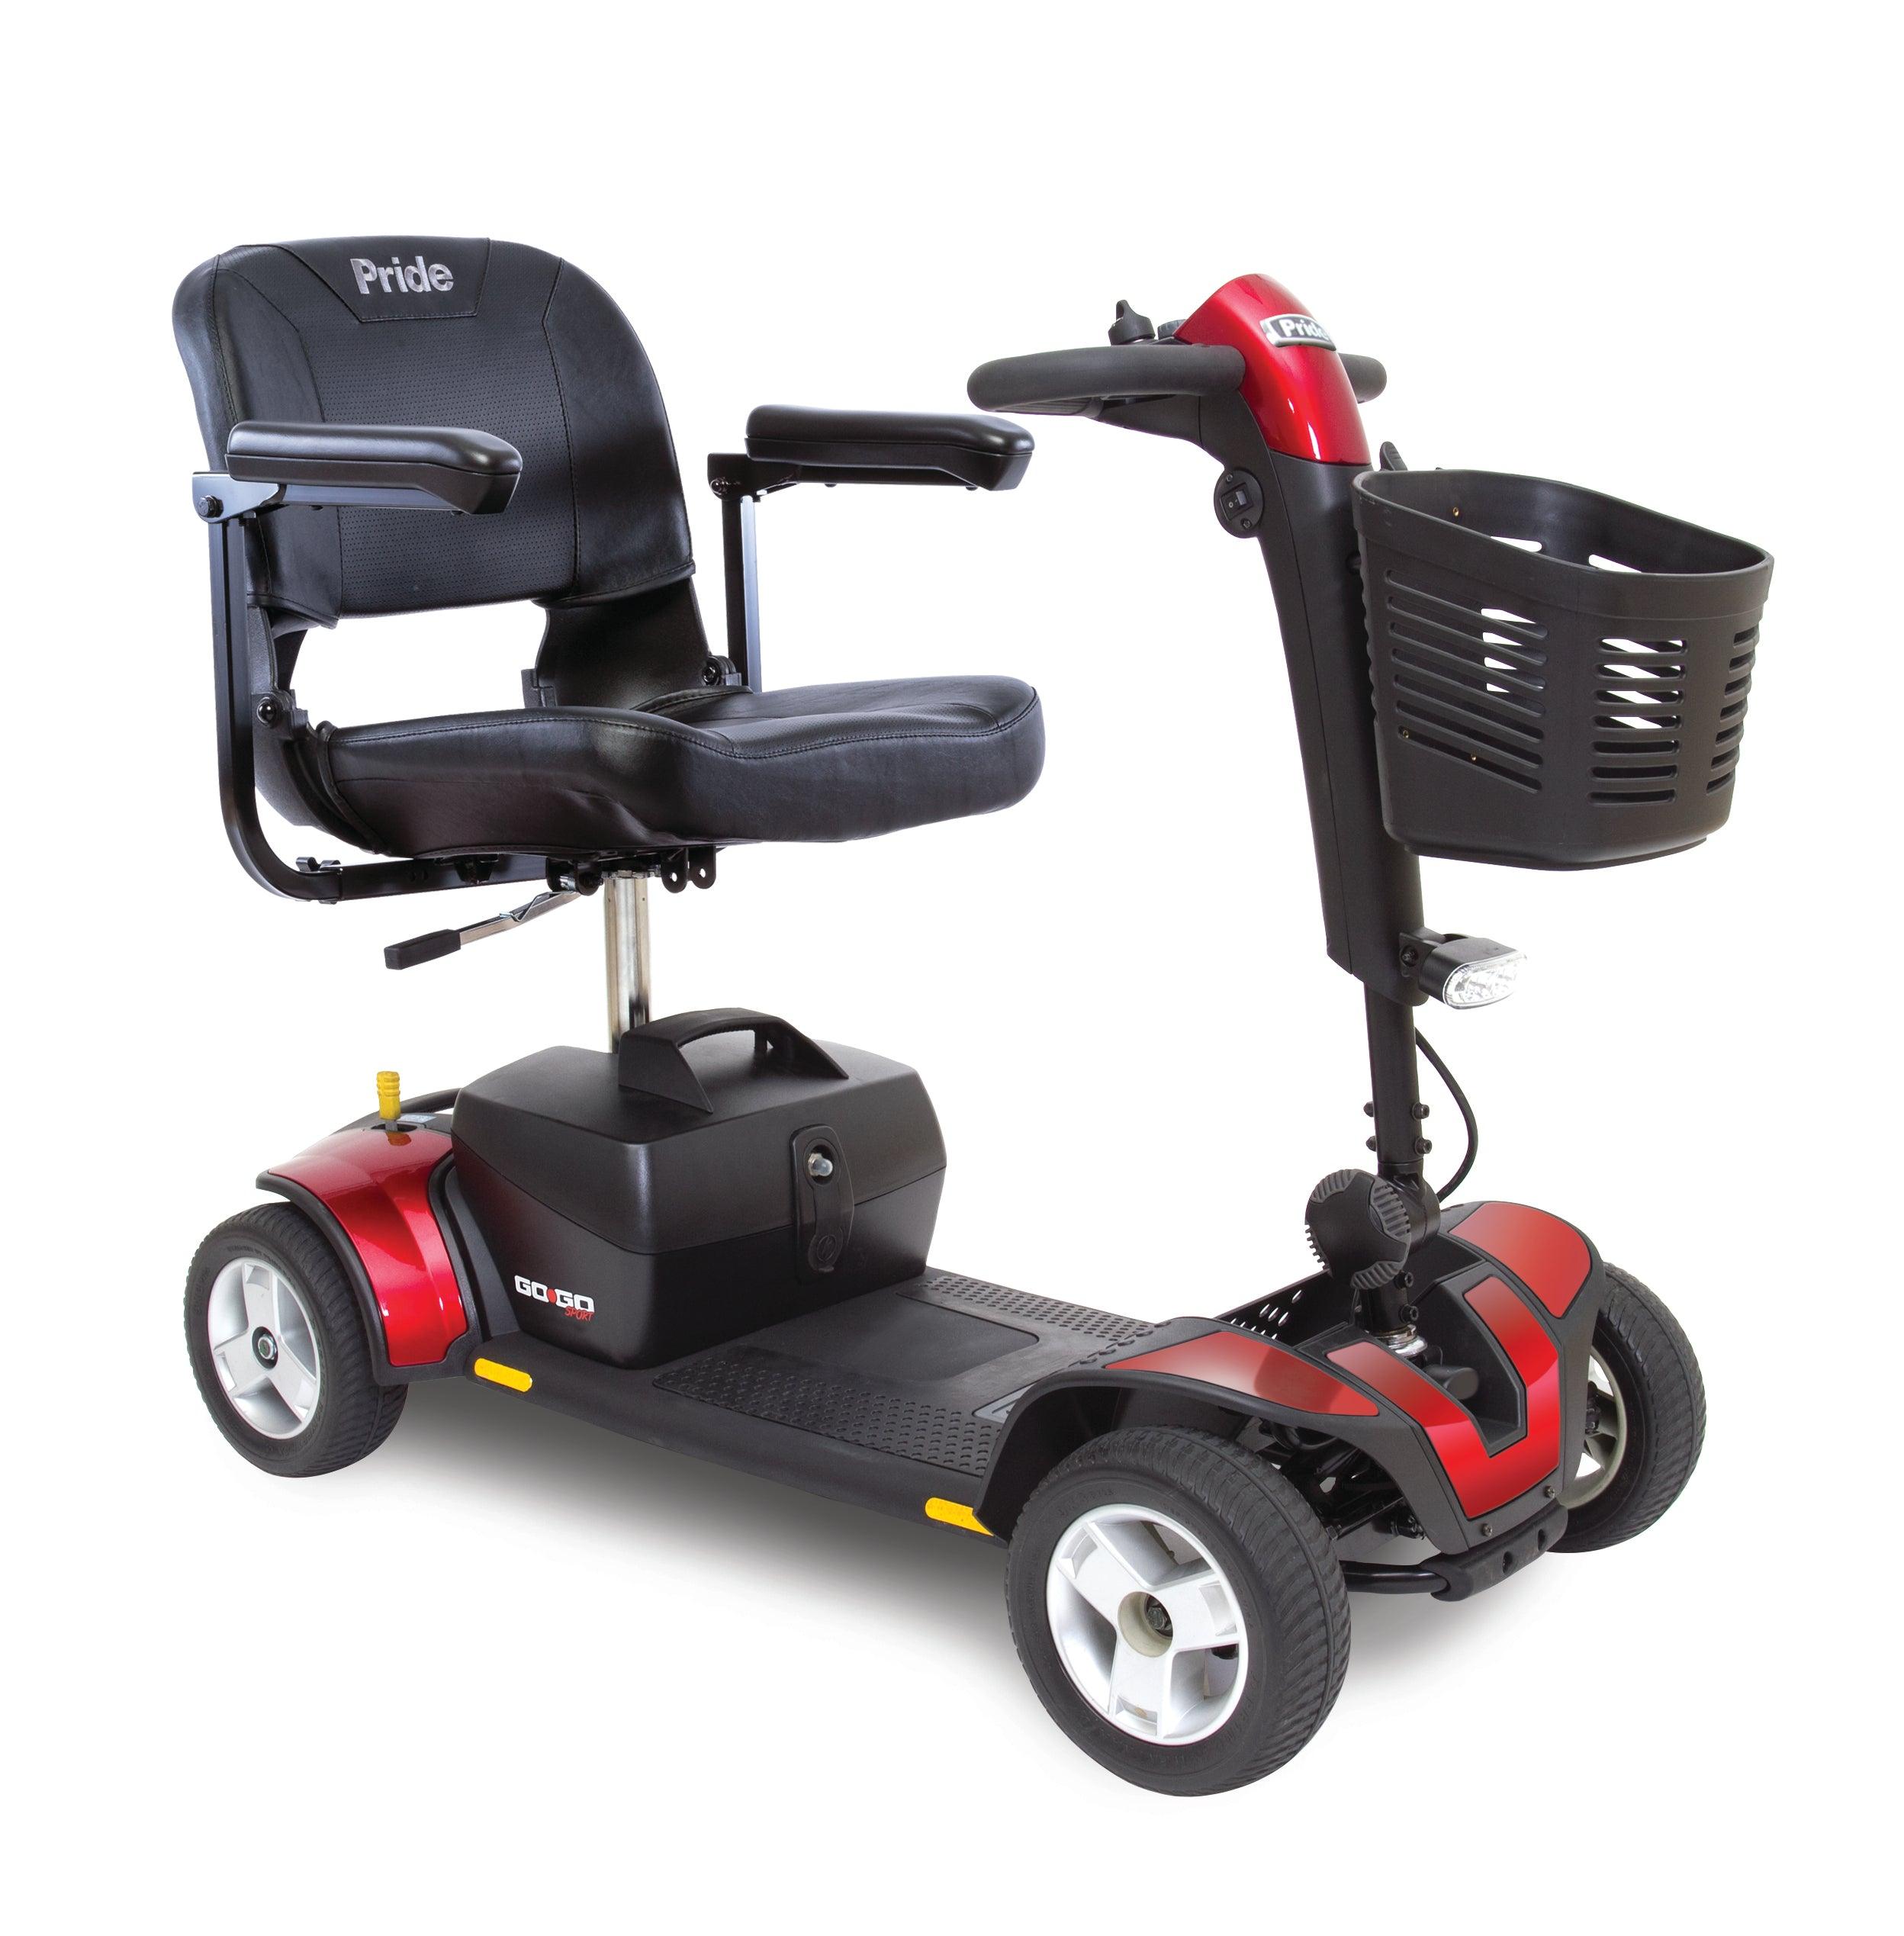 New Pride Go-Go Sport 4-Wheel Mobility Scooter | Lowest Price – Mobility Equipment for Less